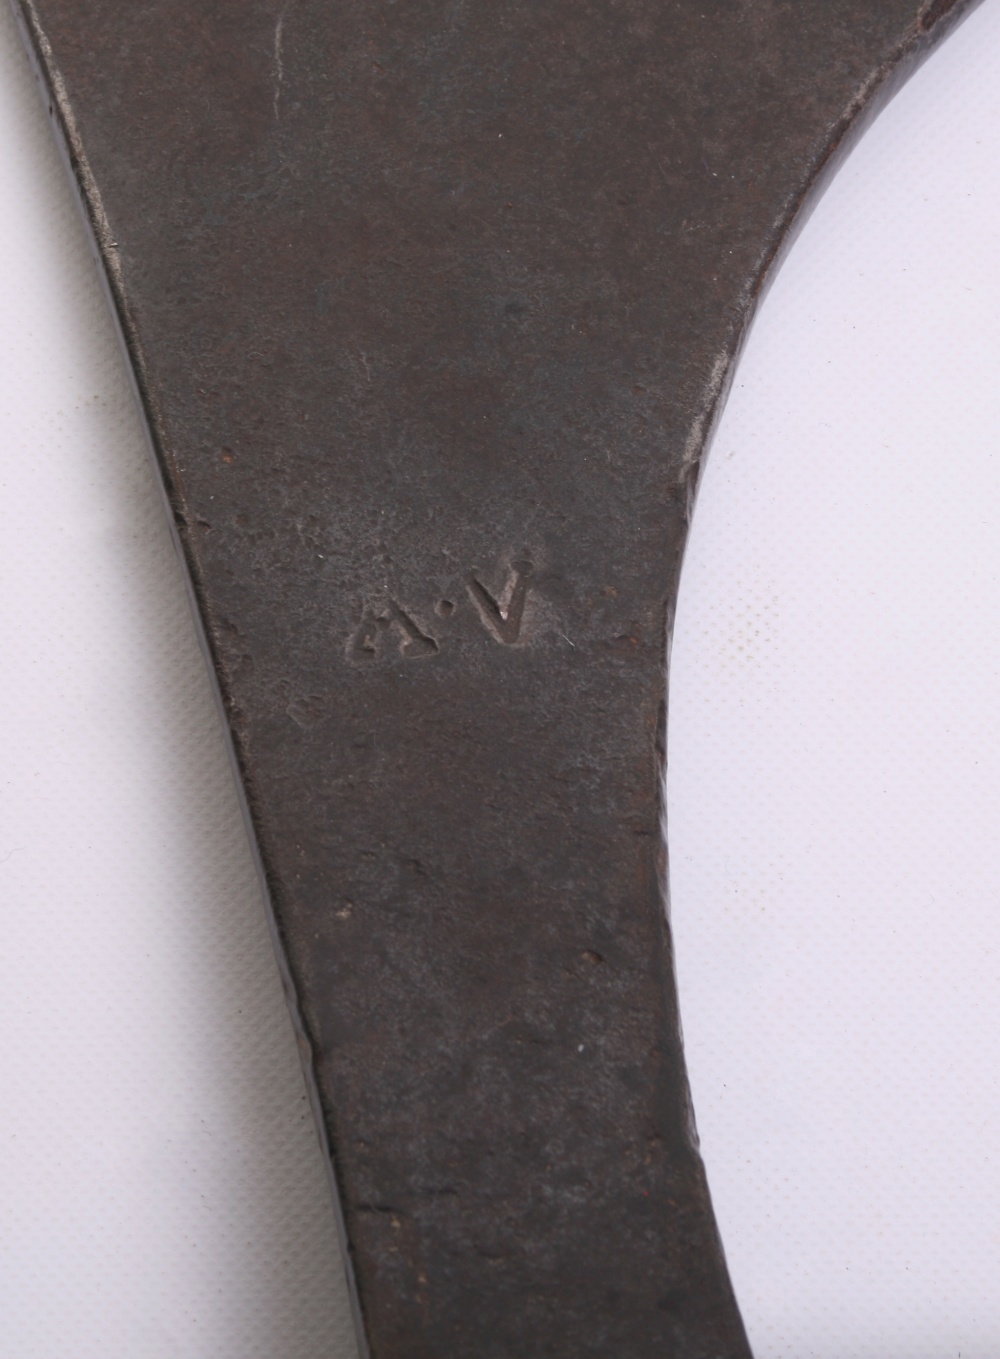 Large Axe of ‘Headsman' Type, heavy blade 15" with 8.75" cutting edge, deeply stamped A.V, - Image 2 of 2